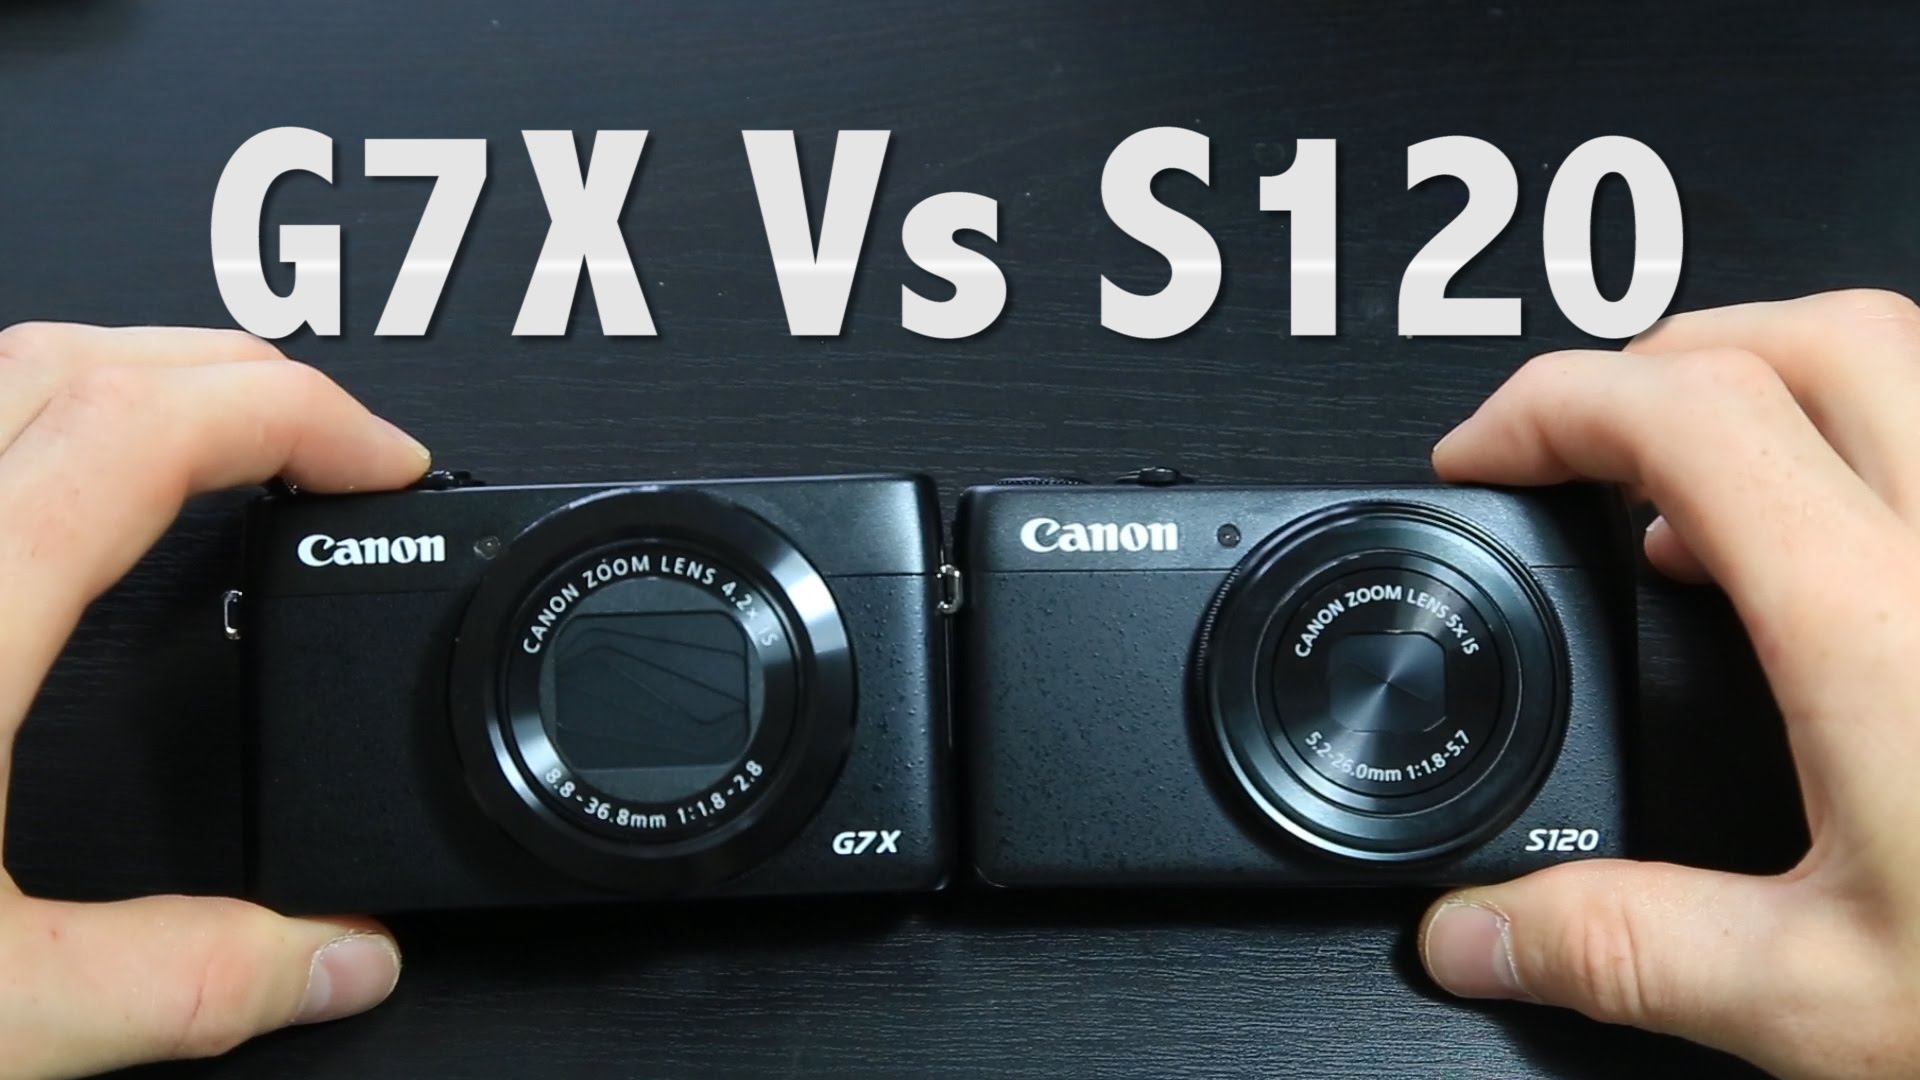 CANON G7X Vs S120 | BEST VLOGGING CAMERA | video, audio tests and unboxing (300)